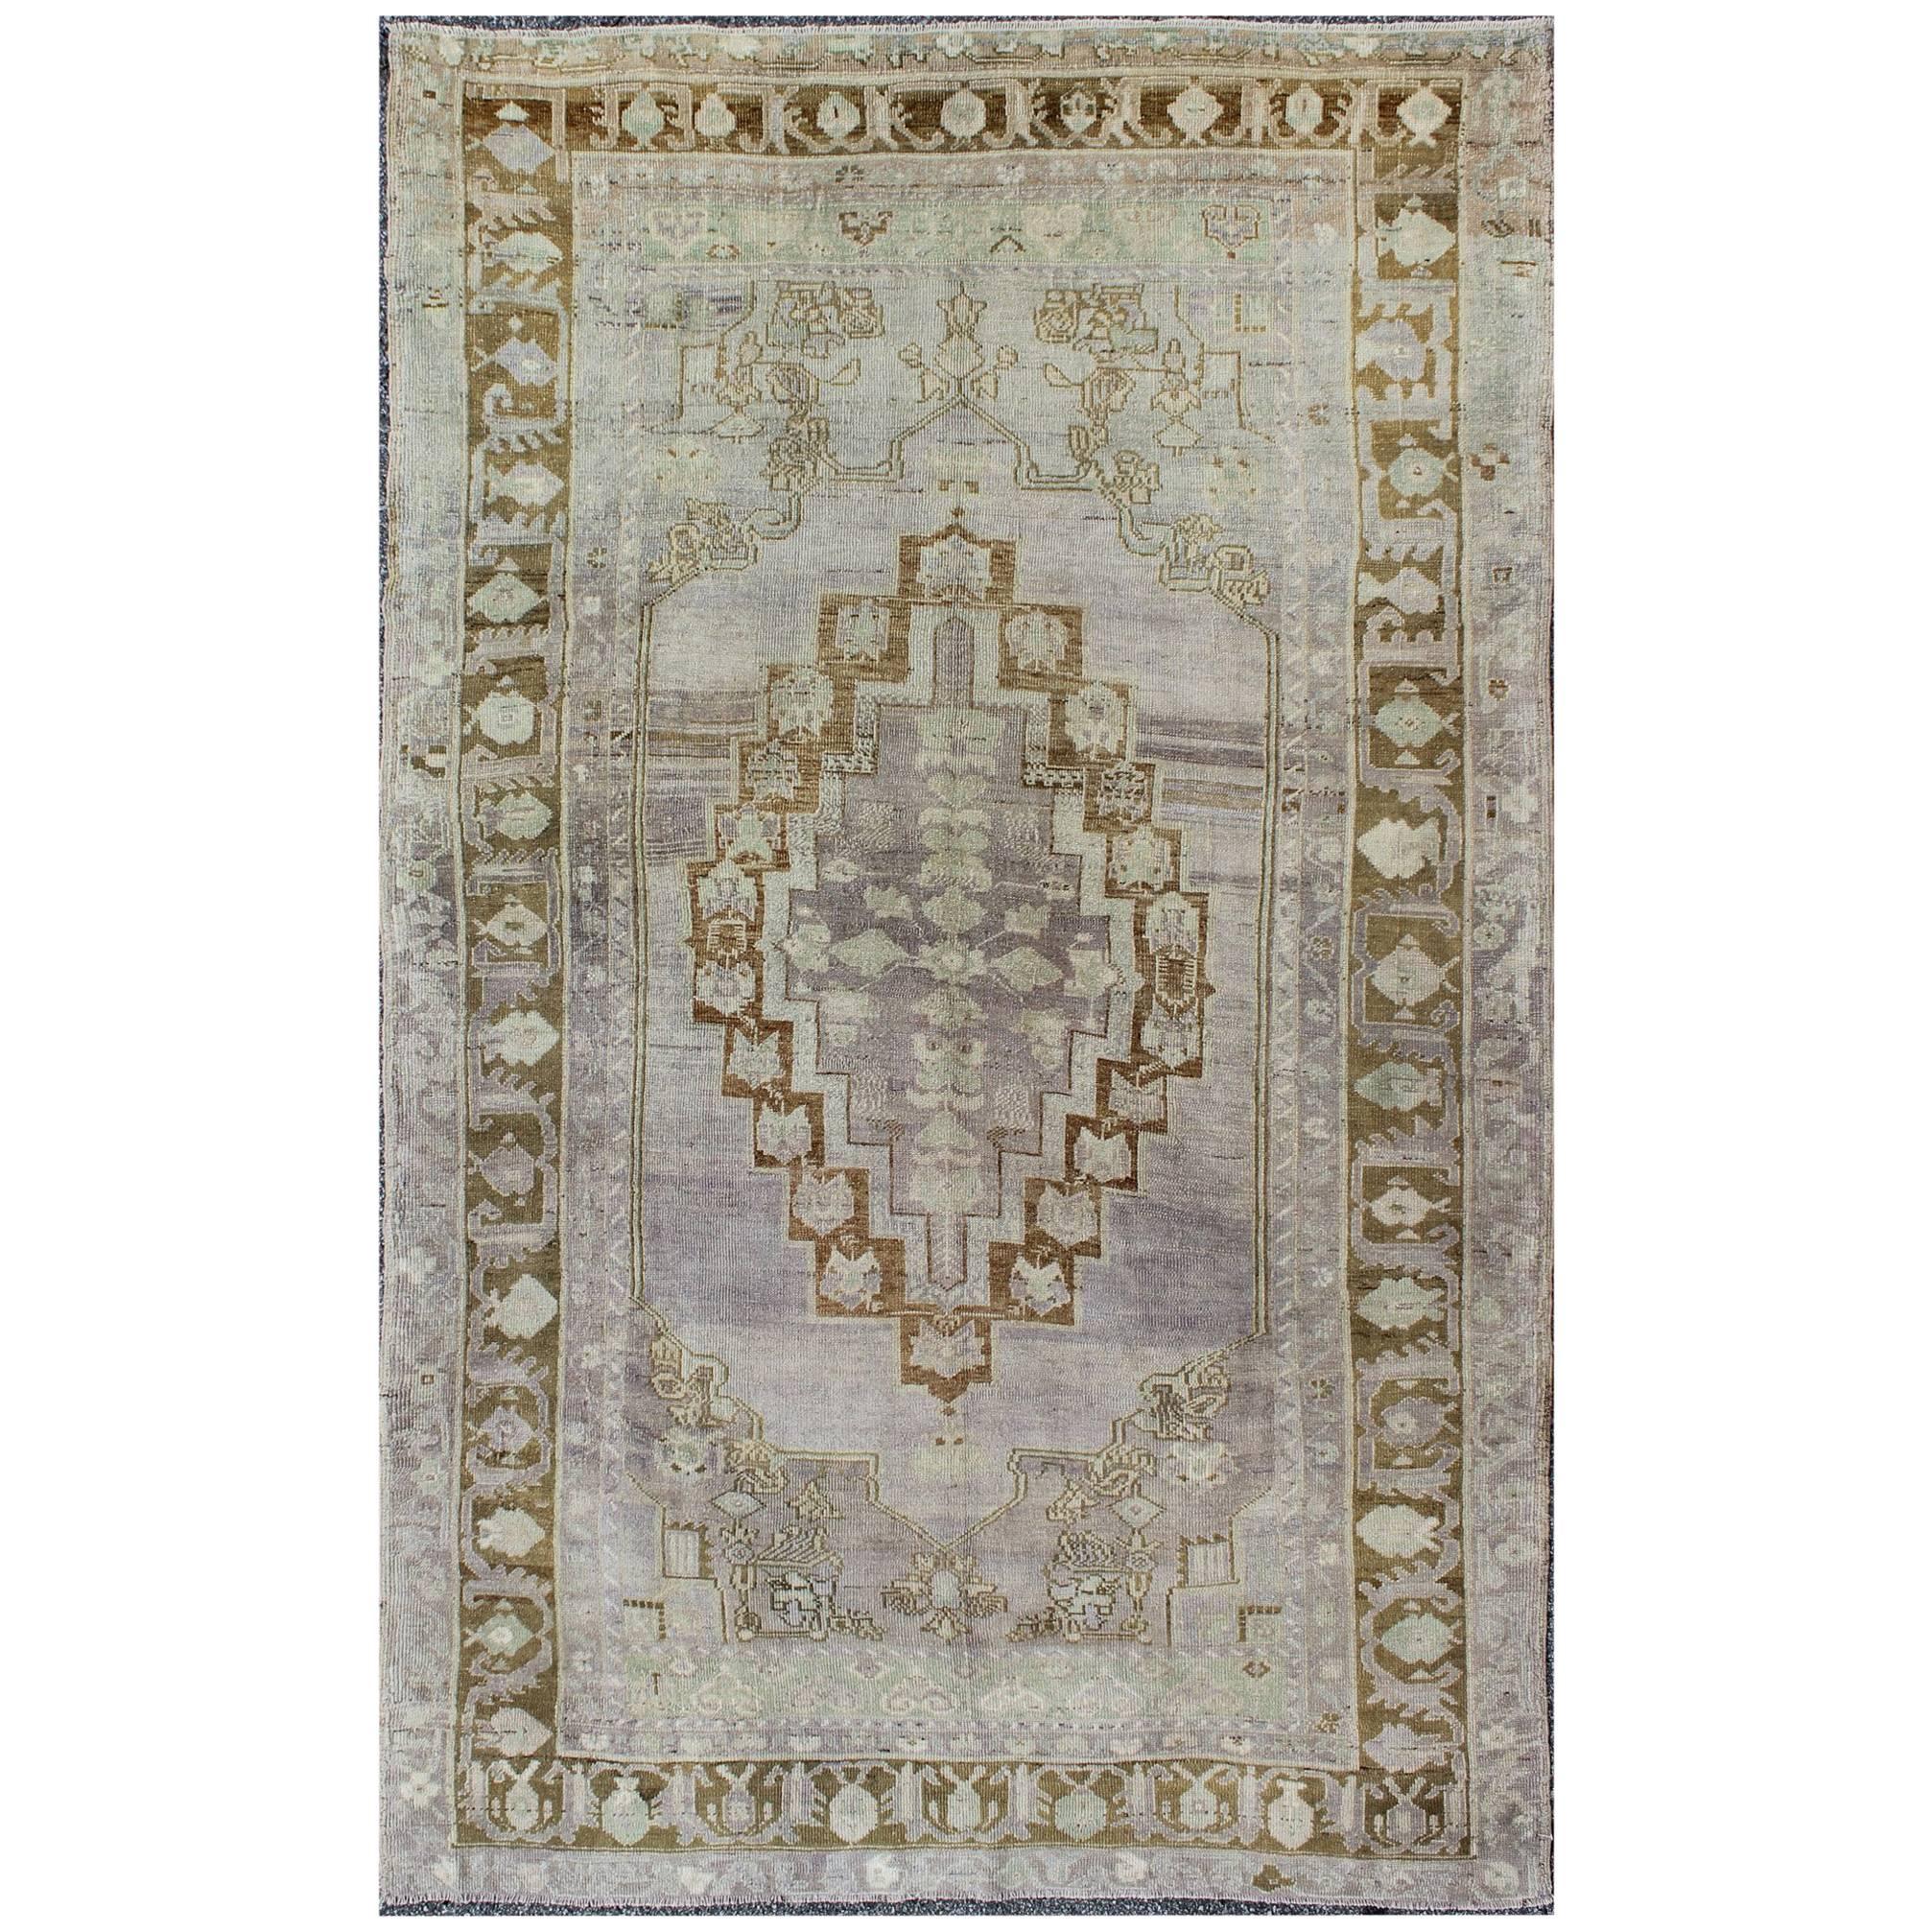 Layered Medallion Oushak Vintage Rug from Turkey with Floral Motifs